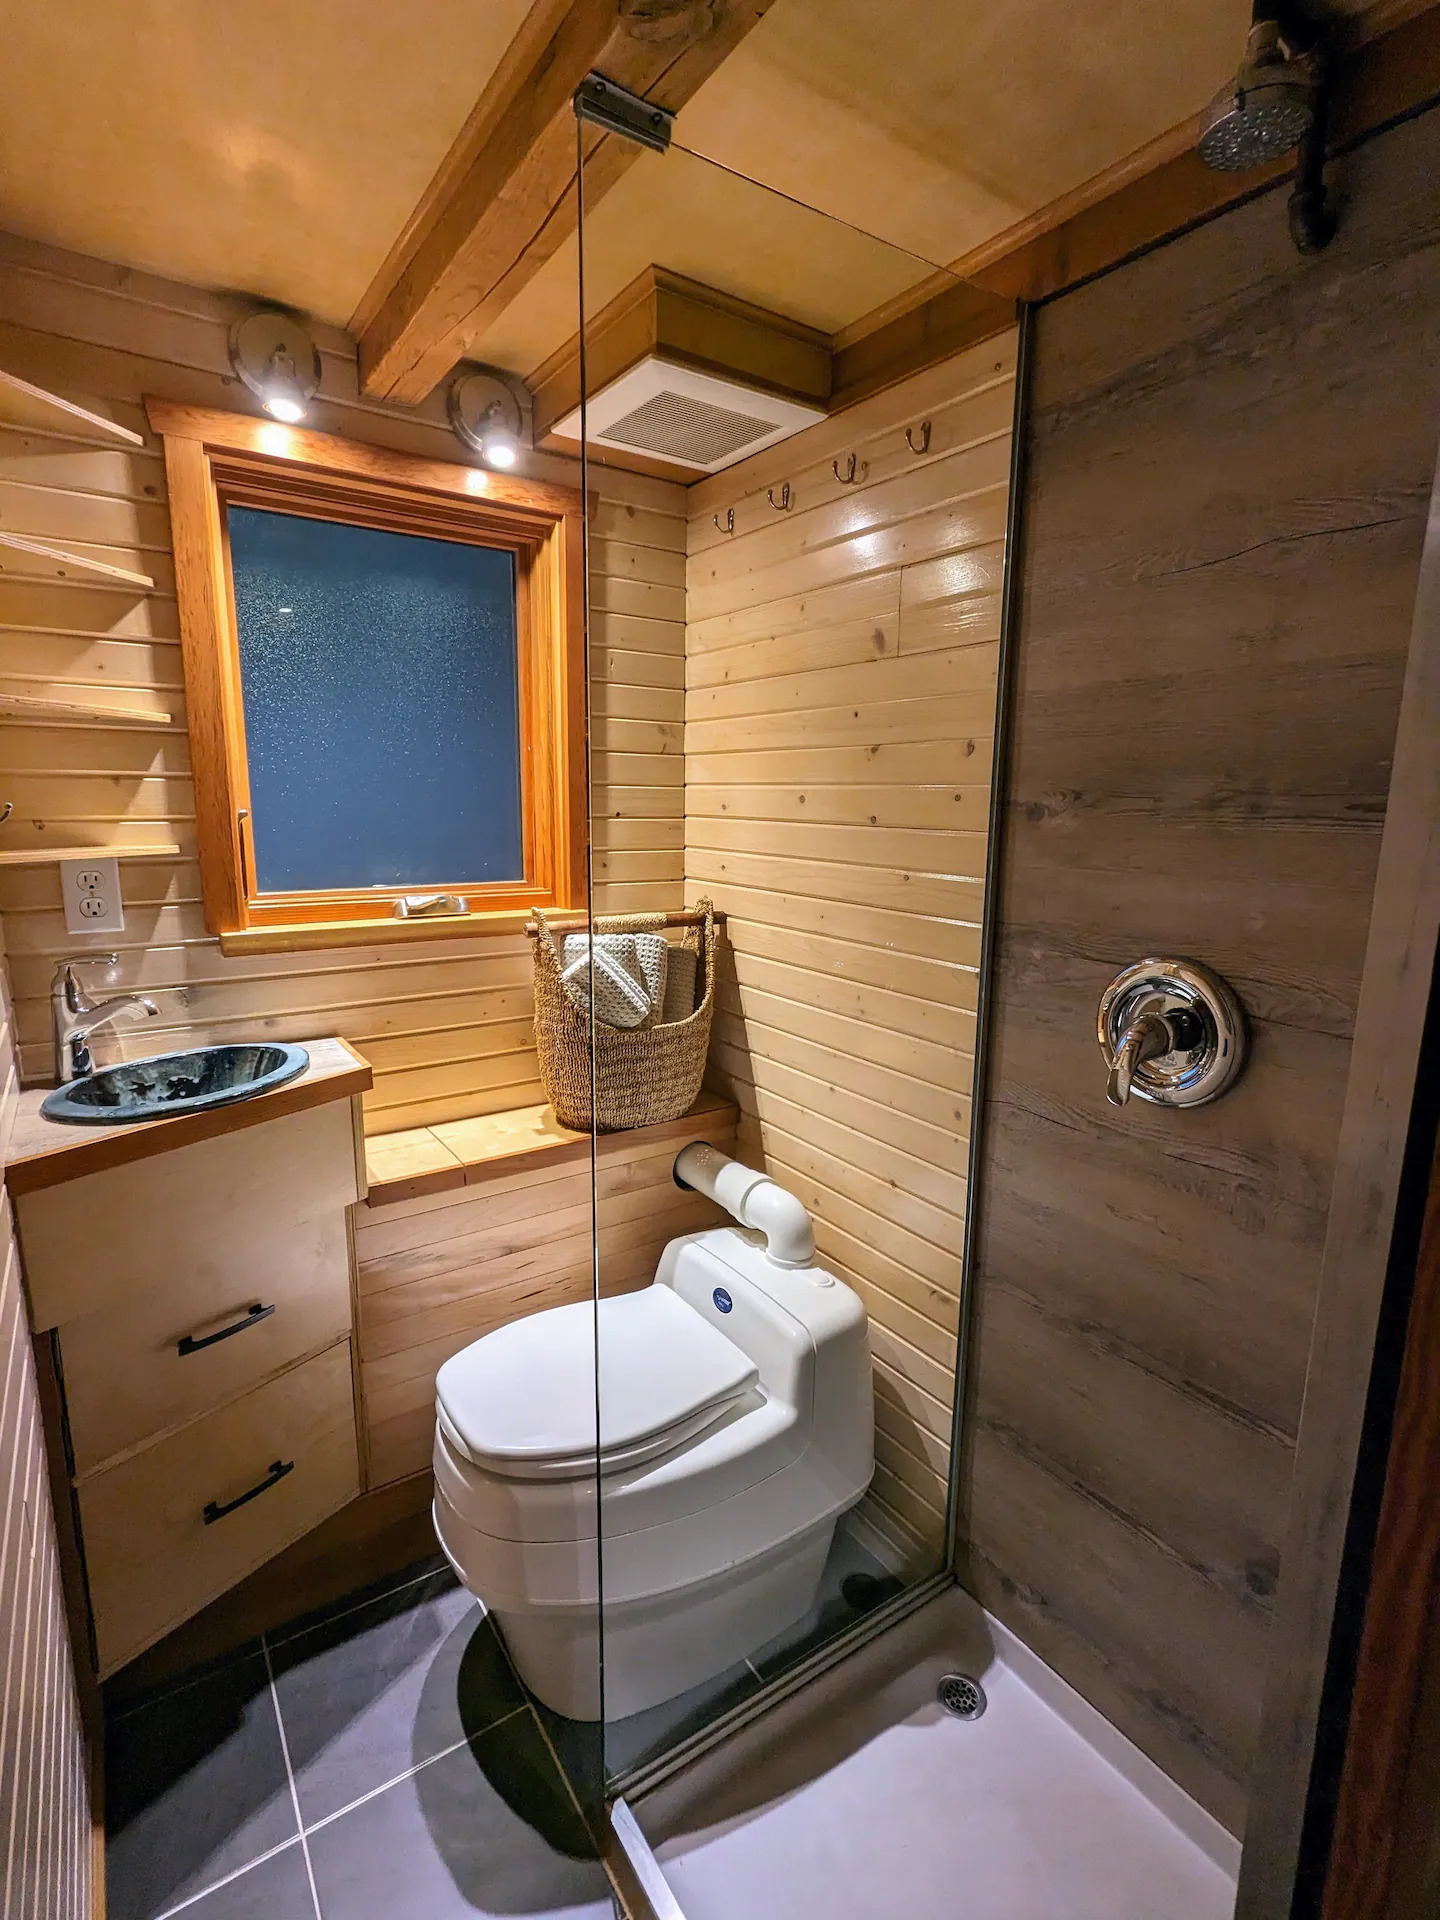 Toilette made of wood, with glass shower